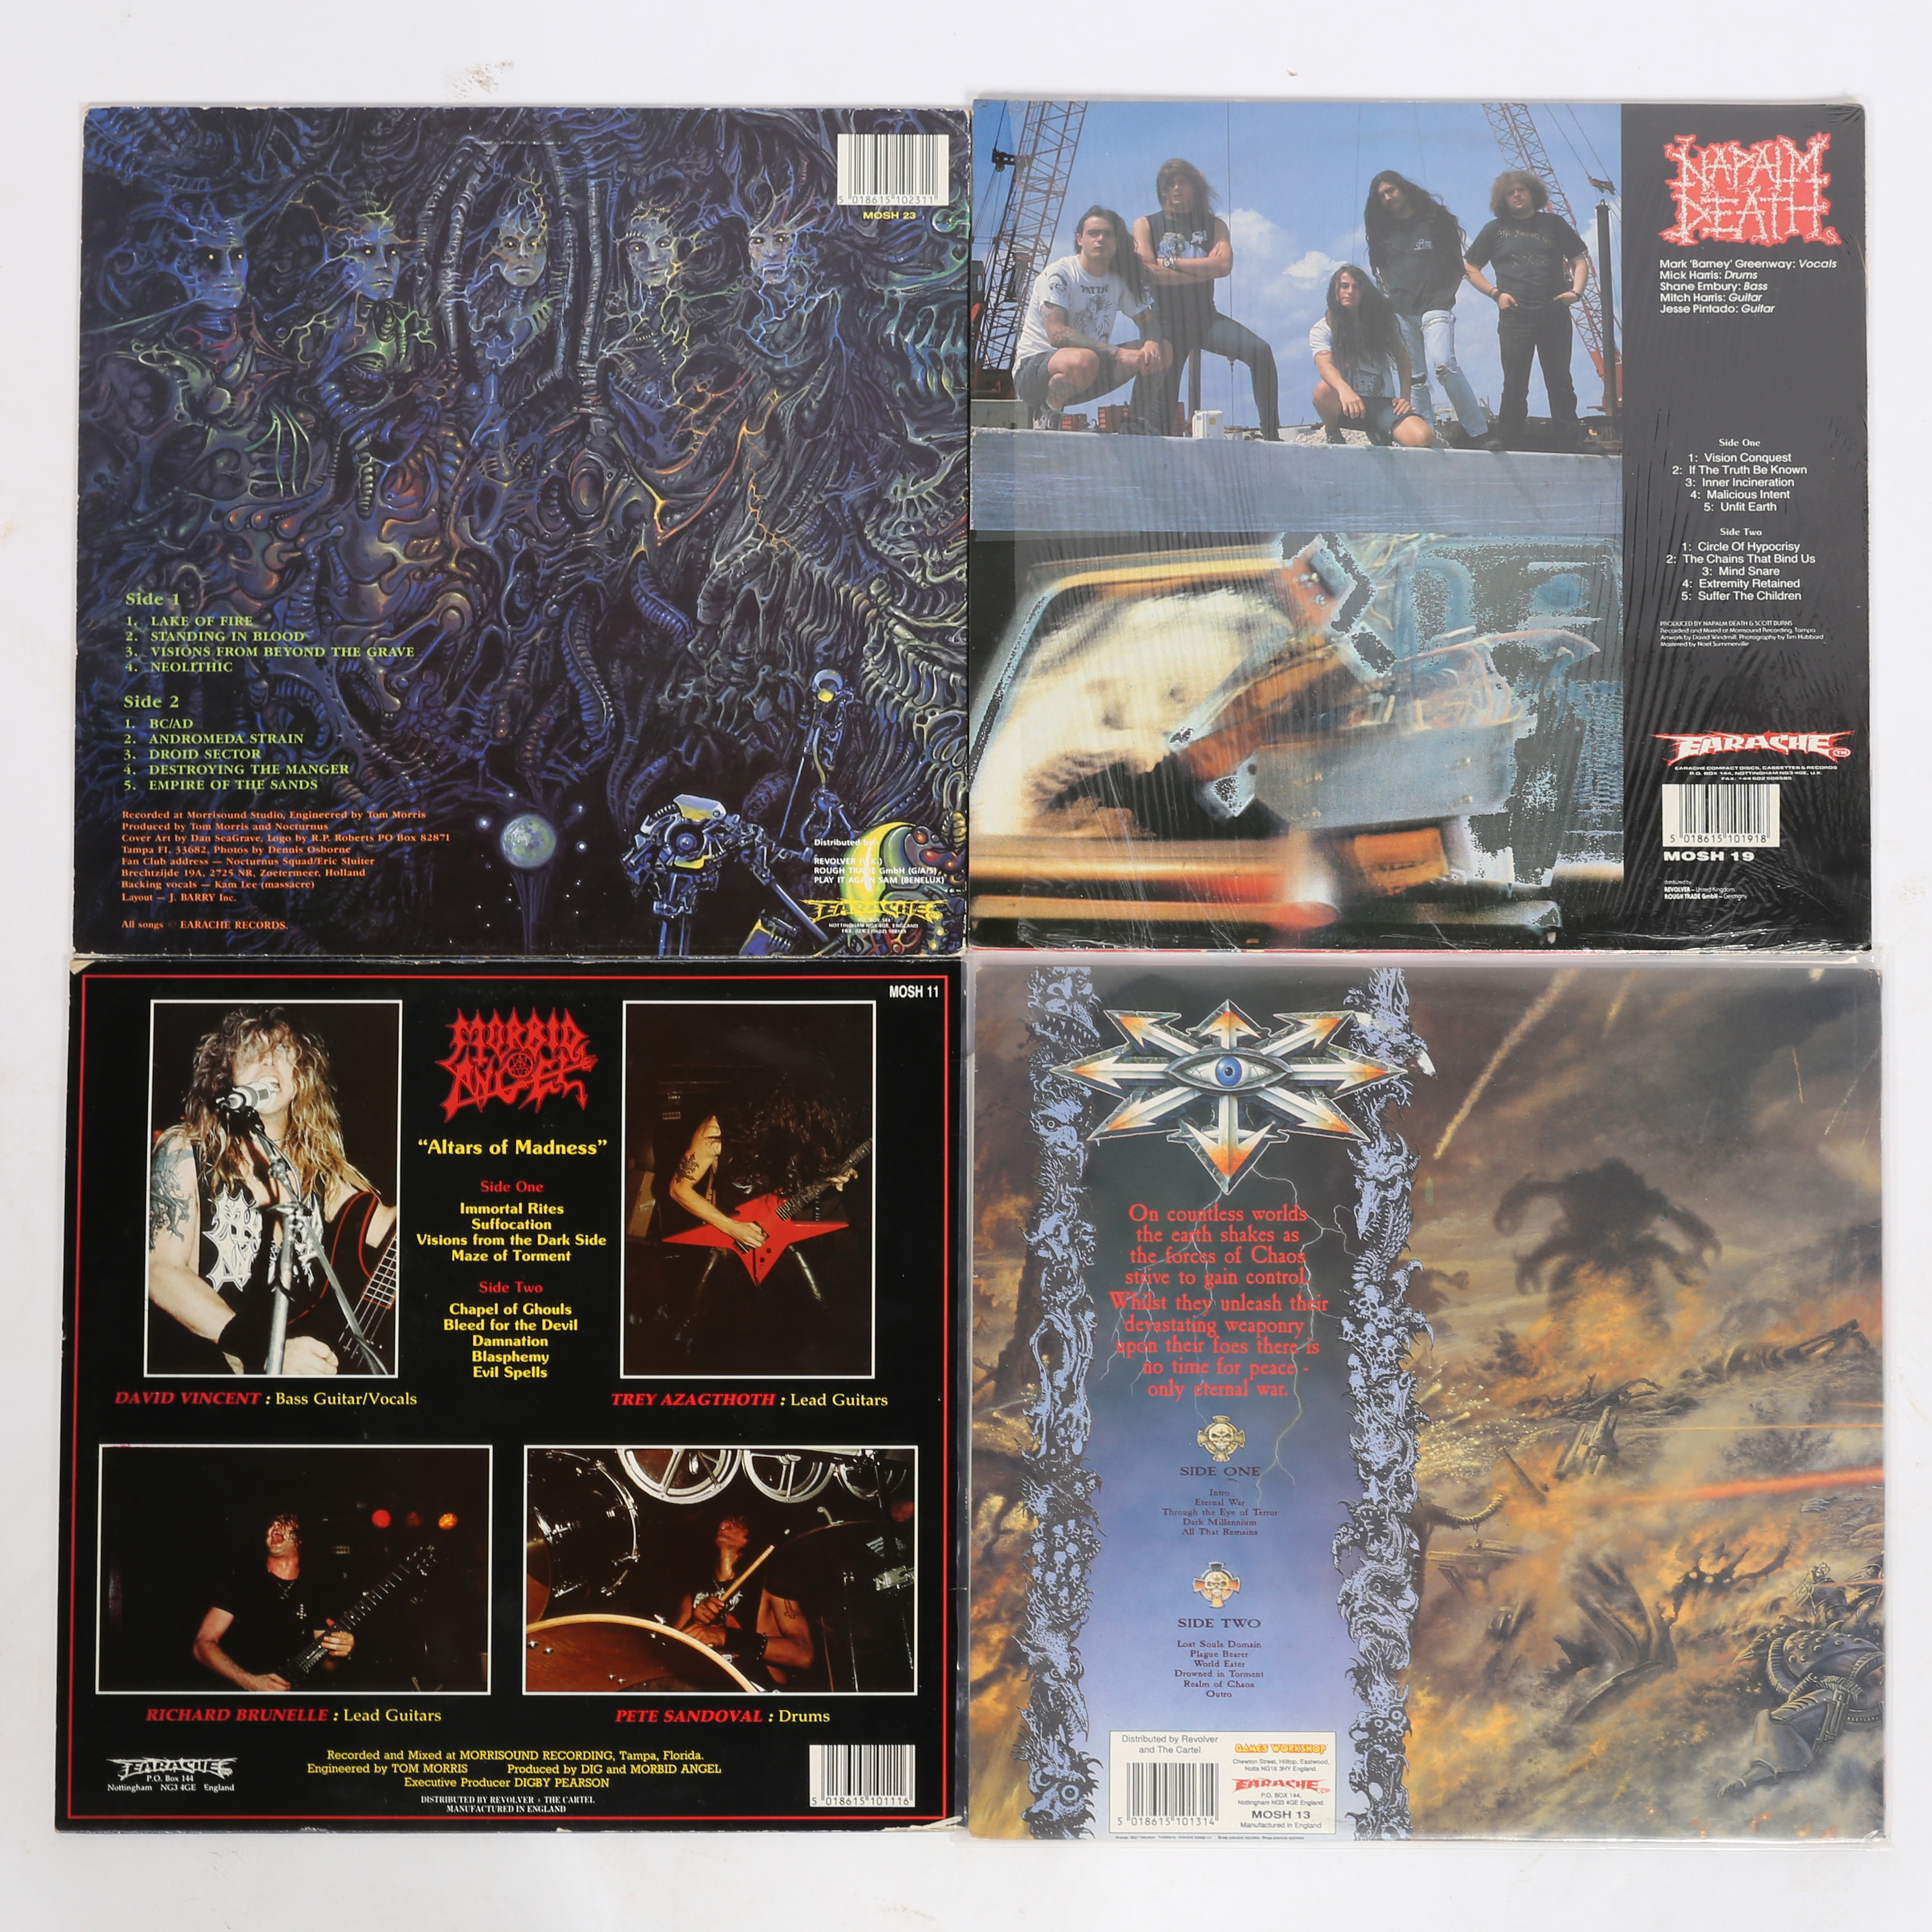 EARACHE RECORDS - DEATH METAL LP COLLECTION. - Image 2 of 2